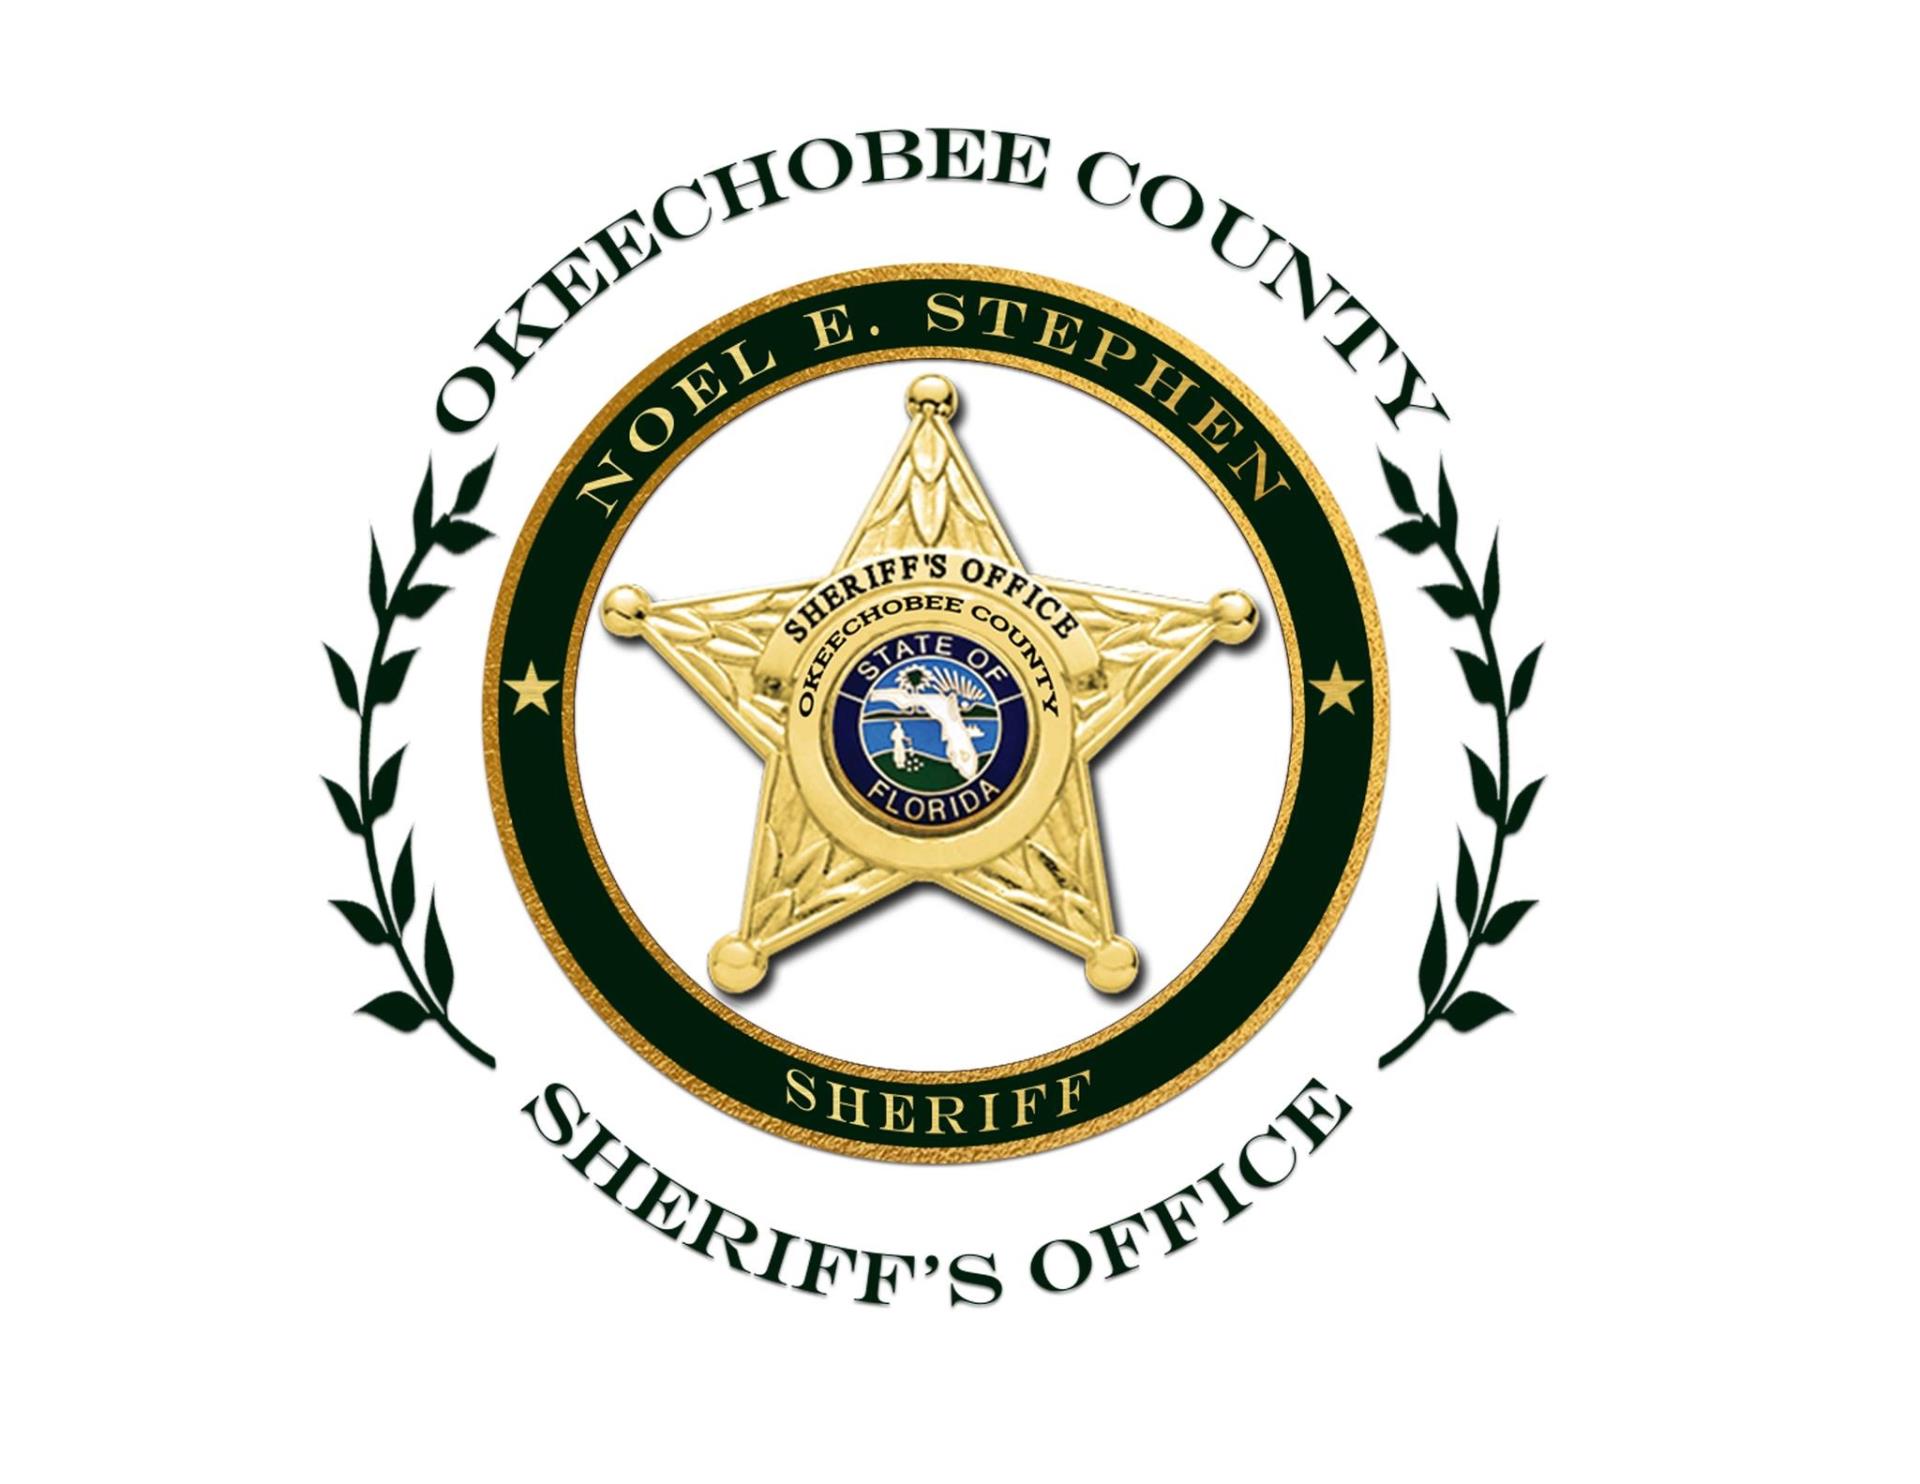 Congratulations to Sheriff Noel Stephen and Okeechobee County Sheriff's Office on achieving the Commission for Law Enforcement Accreditation today!